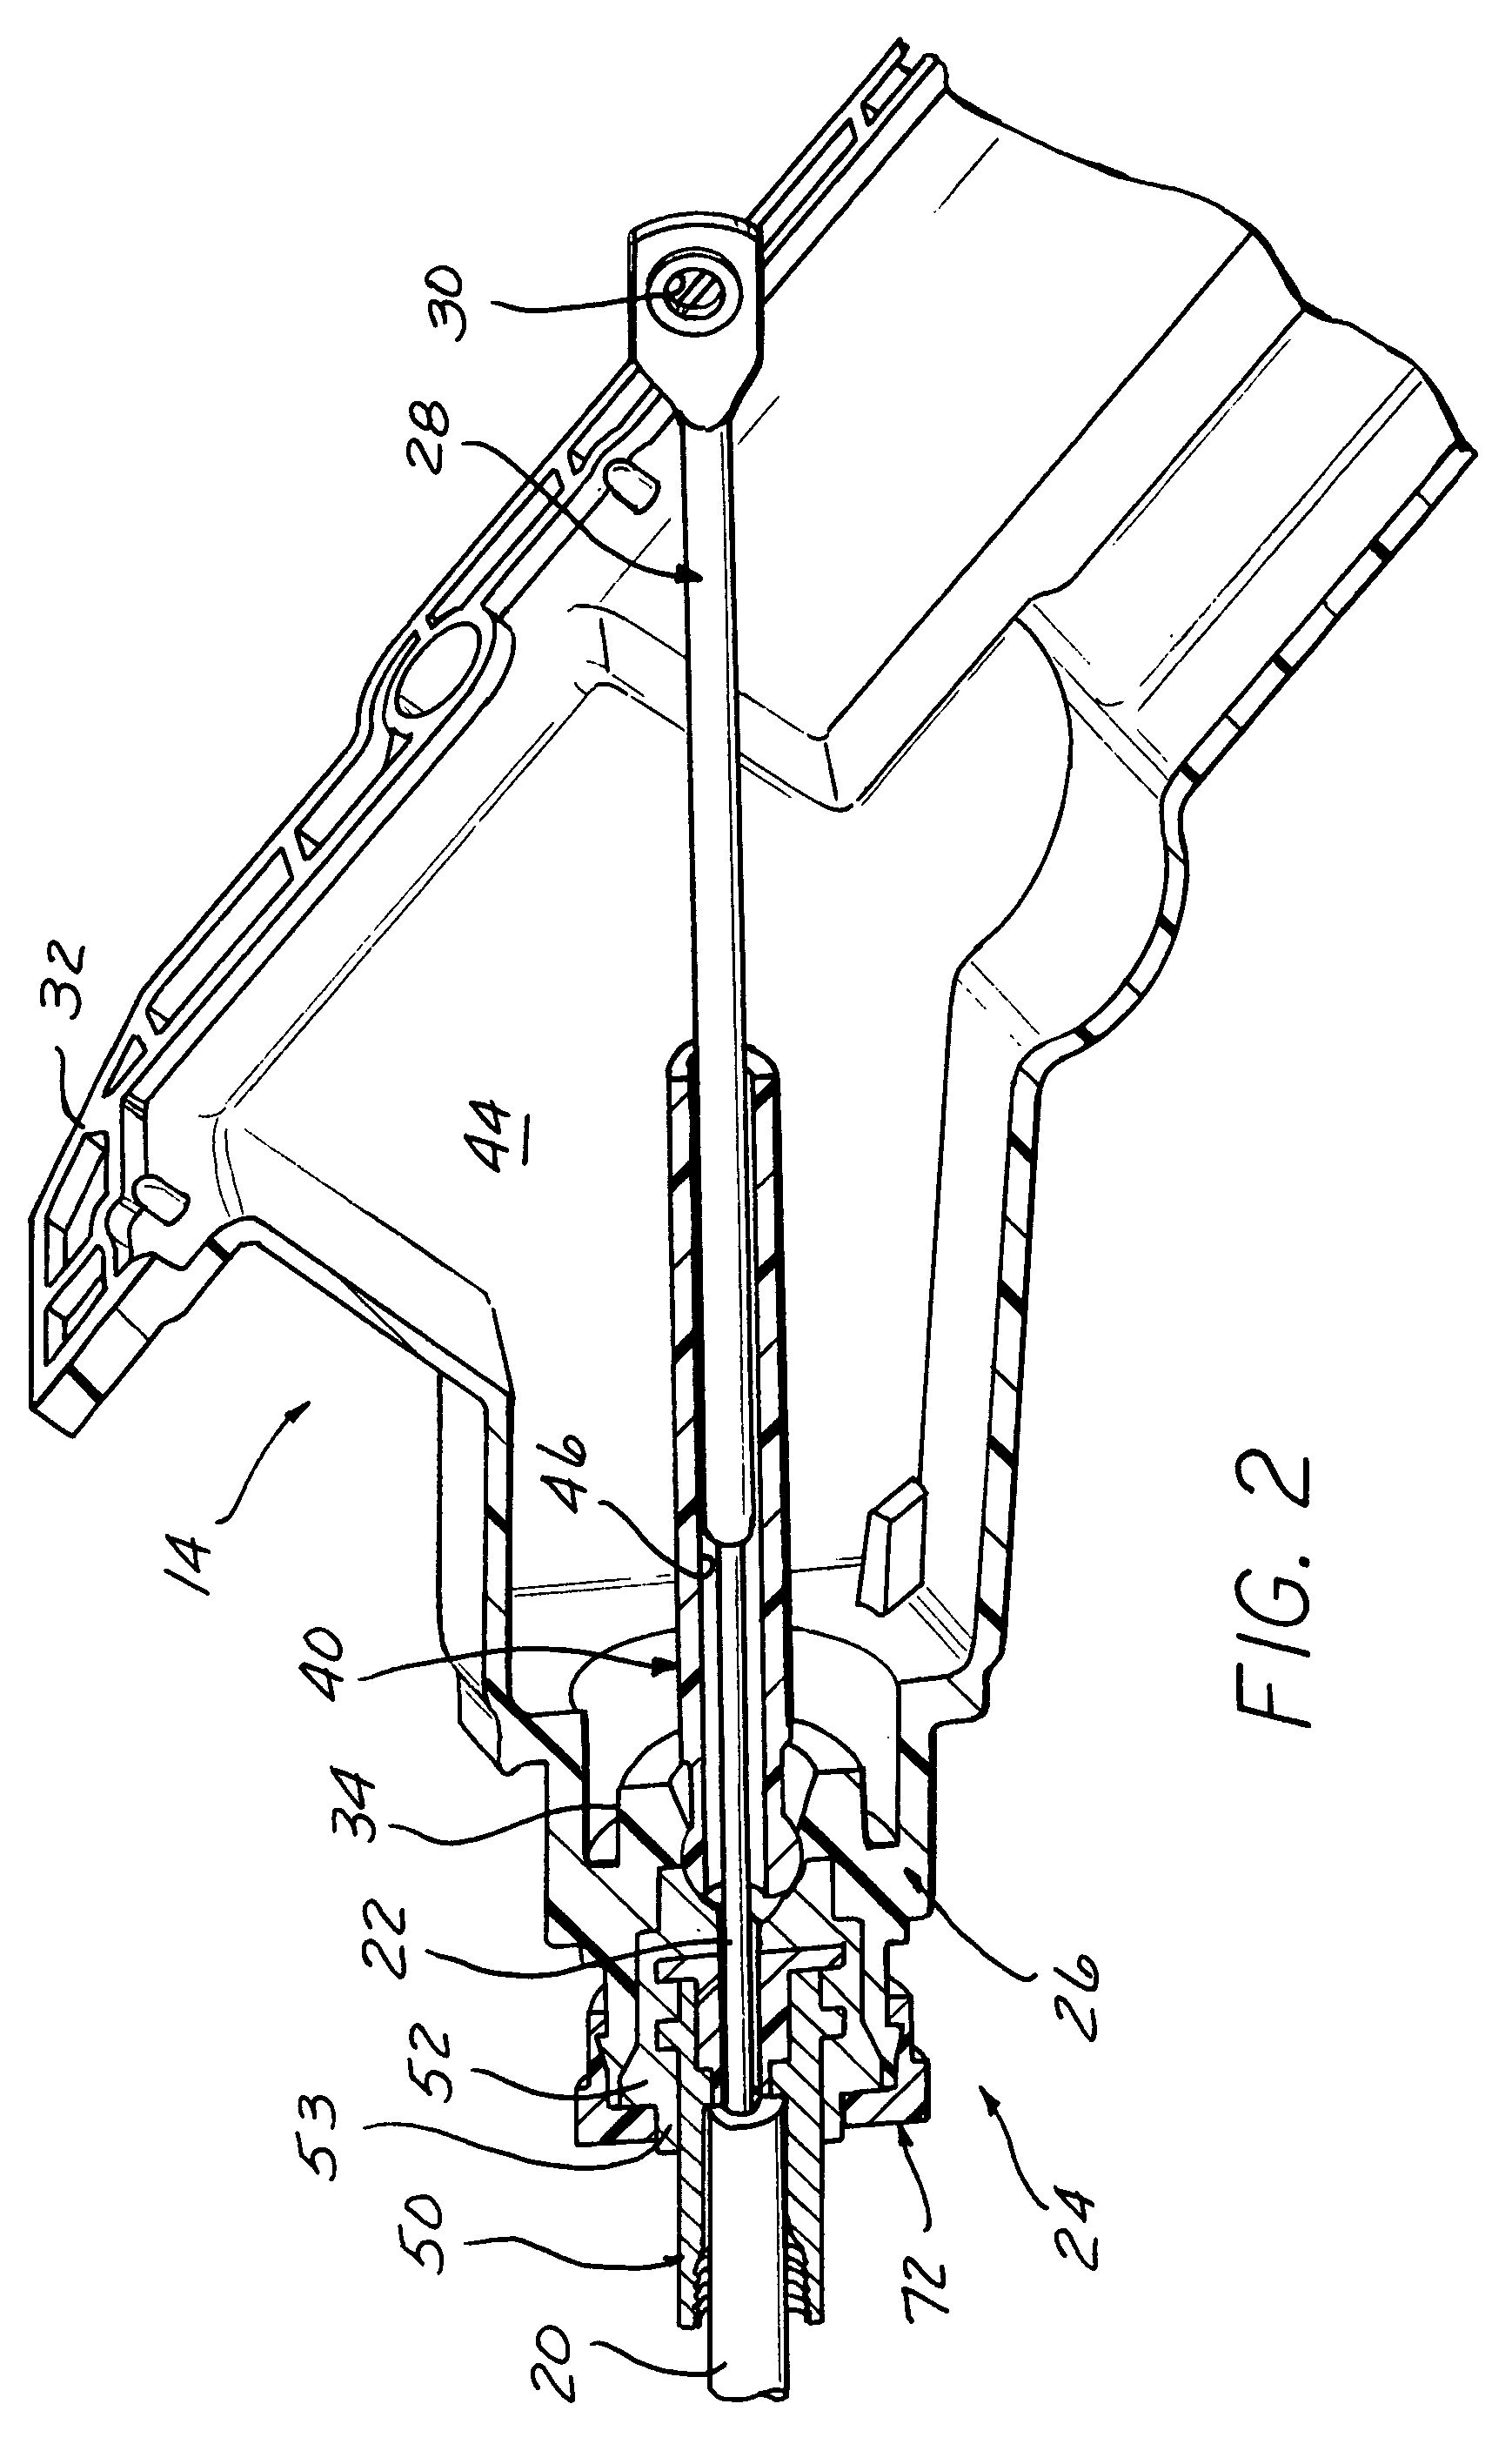 Integrated cable connection and shifter housing